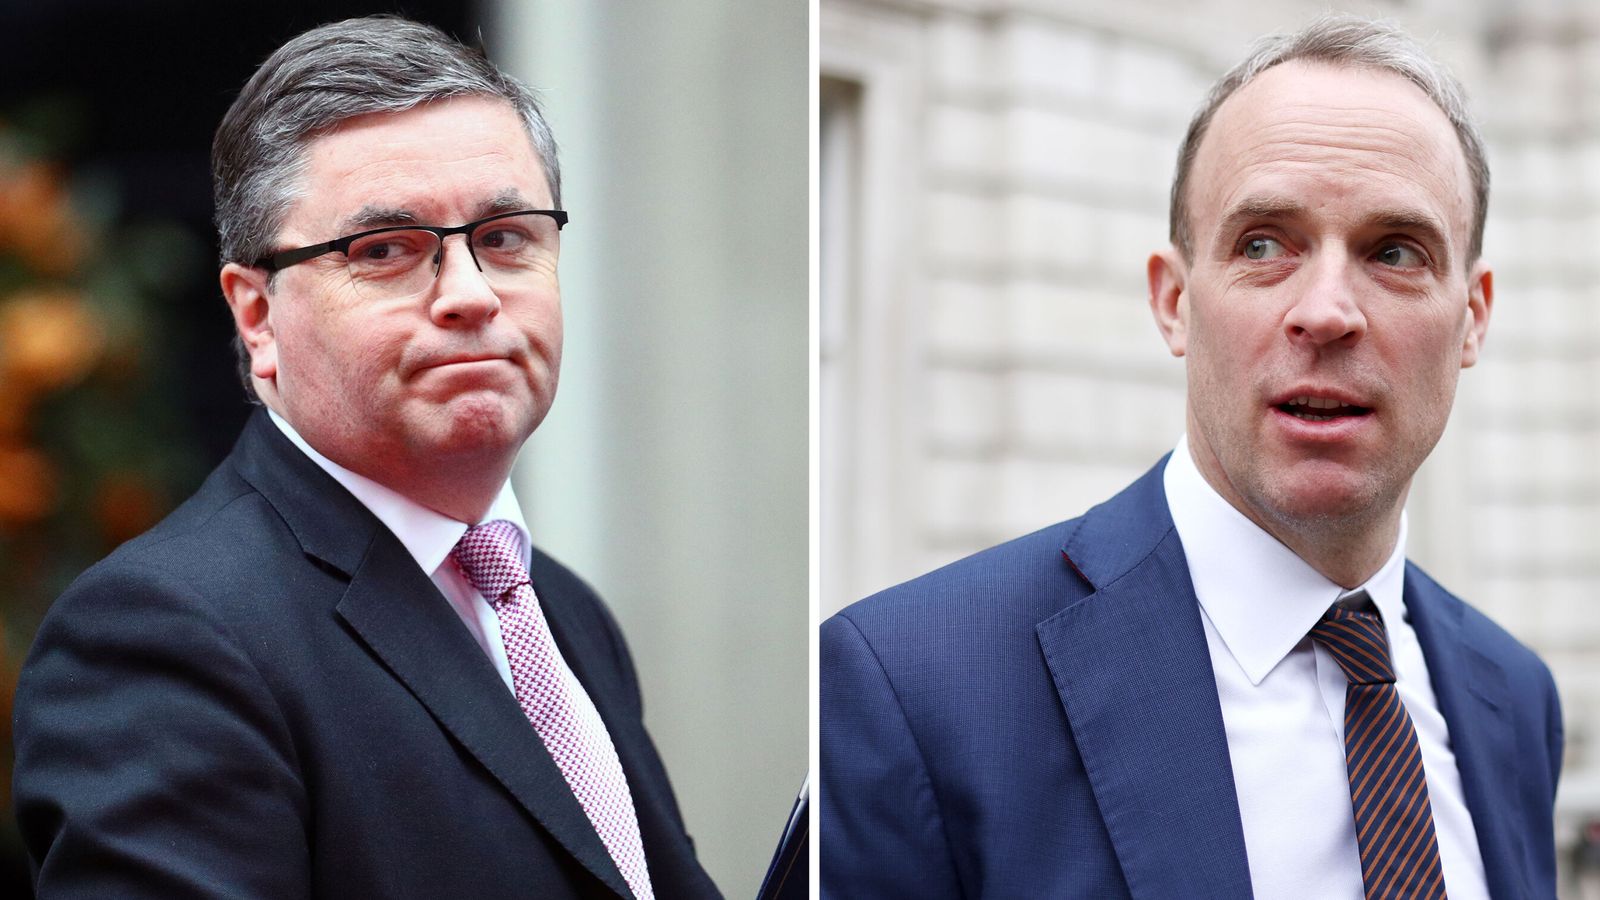 Sir Robert Buckland confirms 'disagreement' with Dominic Raab after reports deputy PM tried to get him sacked